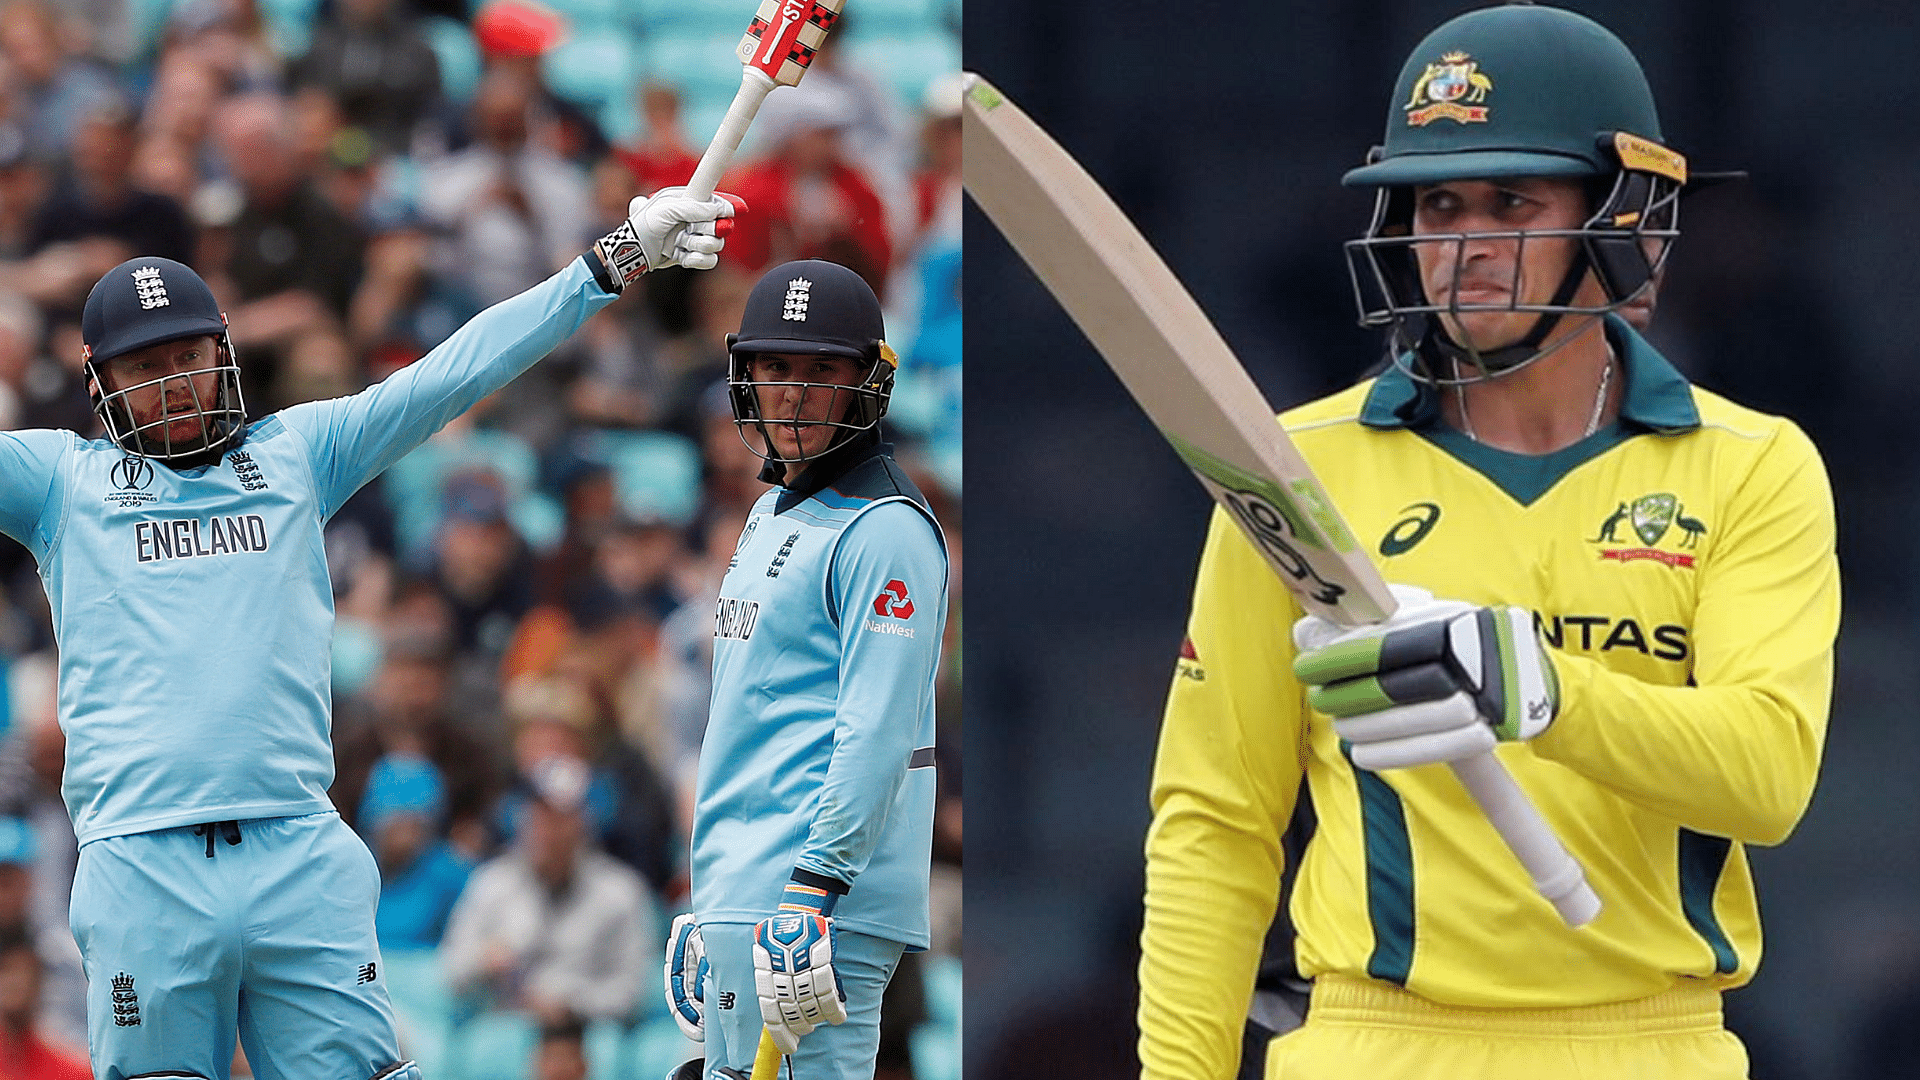 Australia overhauled Sri Lanka and England swatted aside Afghanistan with a clean bill of health in their last Cricket World Cup warm-up match.